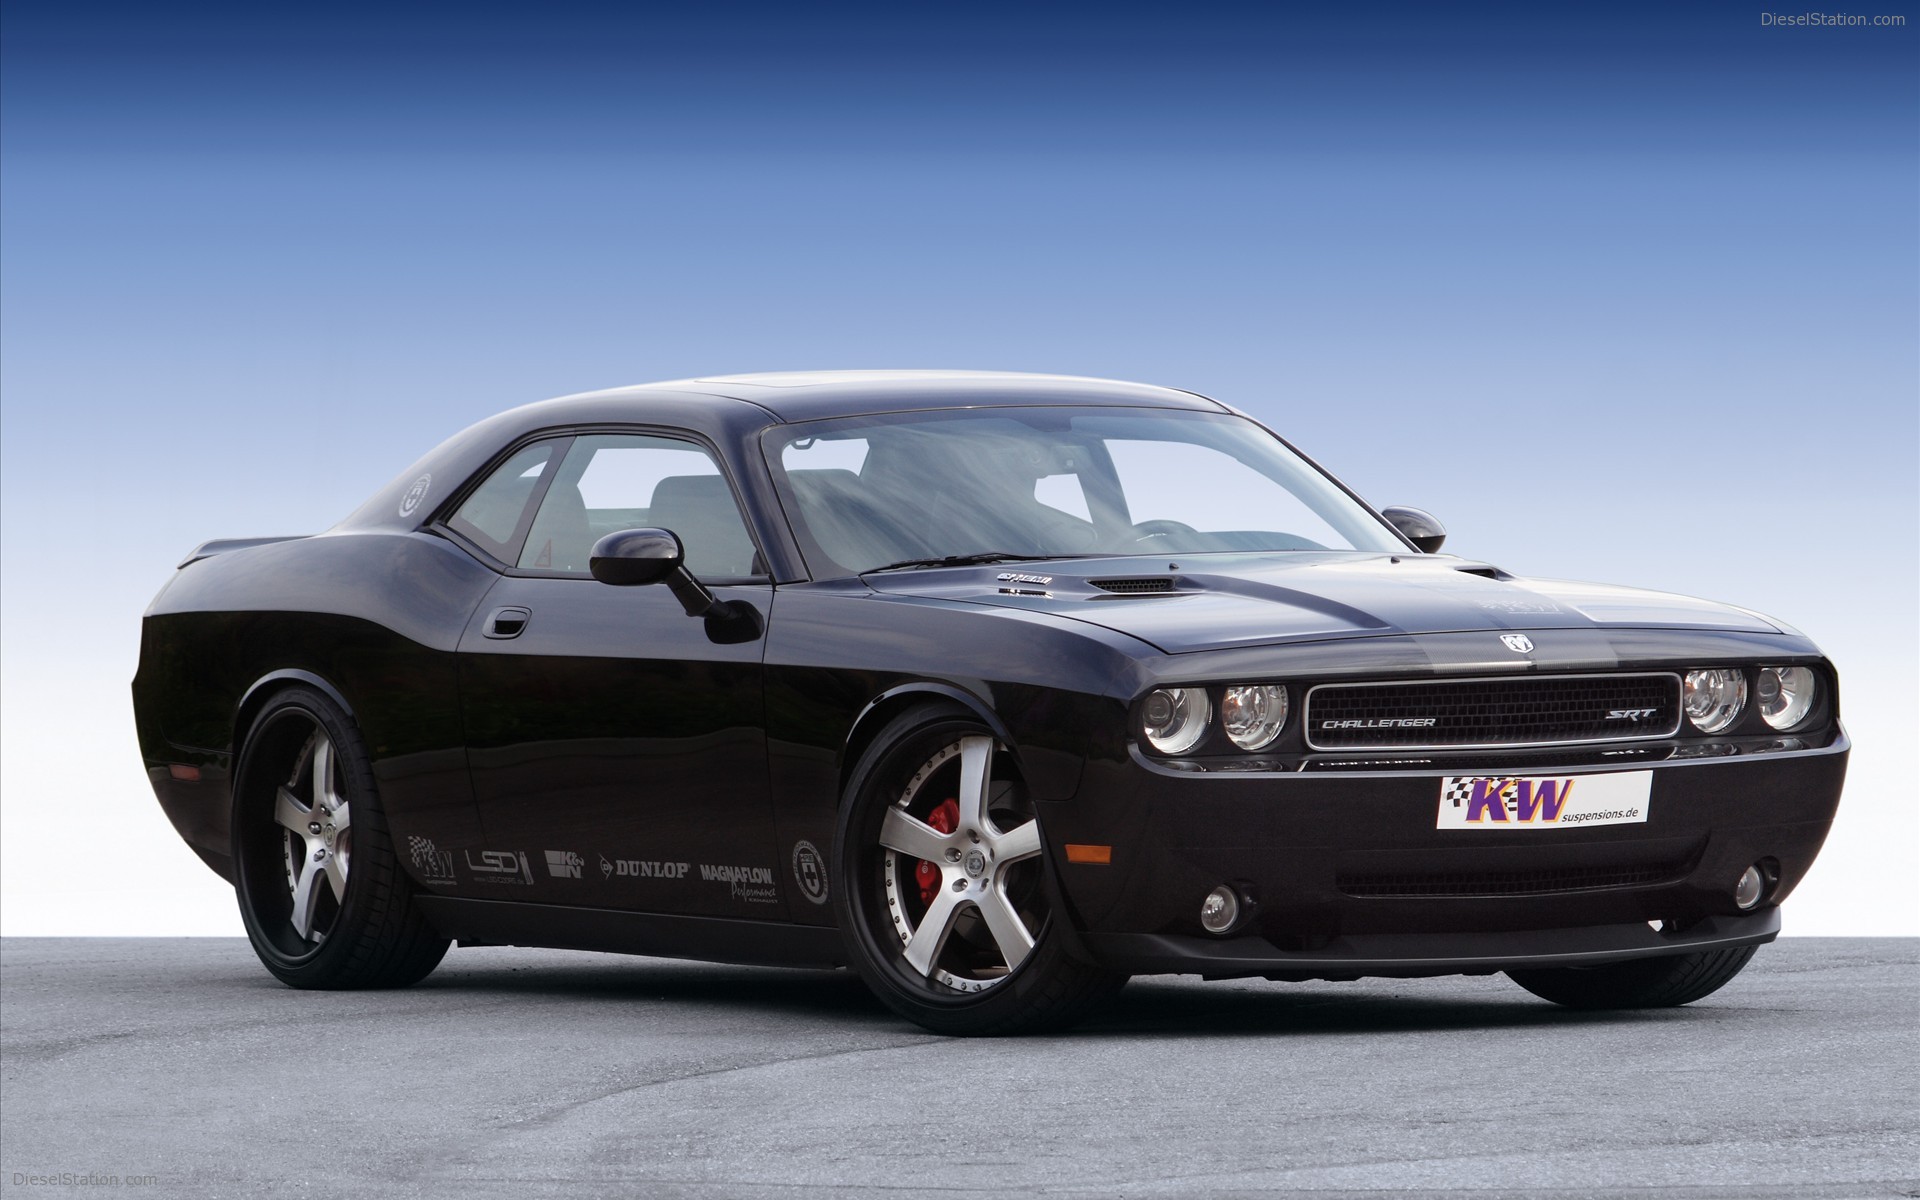 Kw Refines The Dodge Challenger Widescreen Exotic Car Picture Of